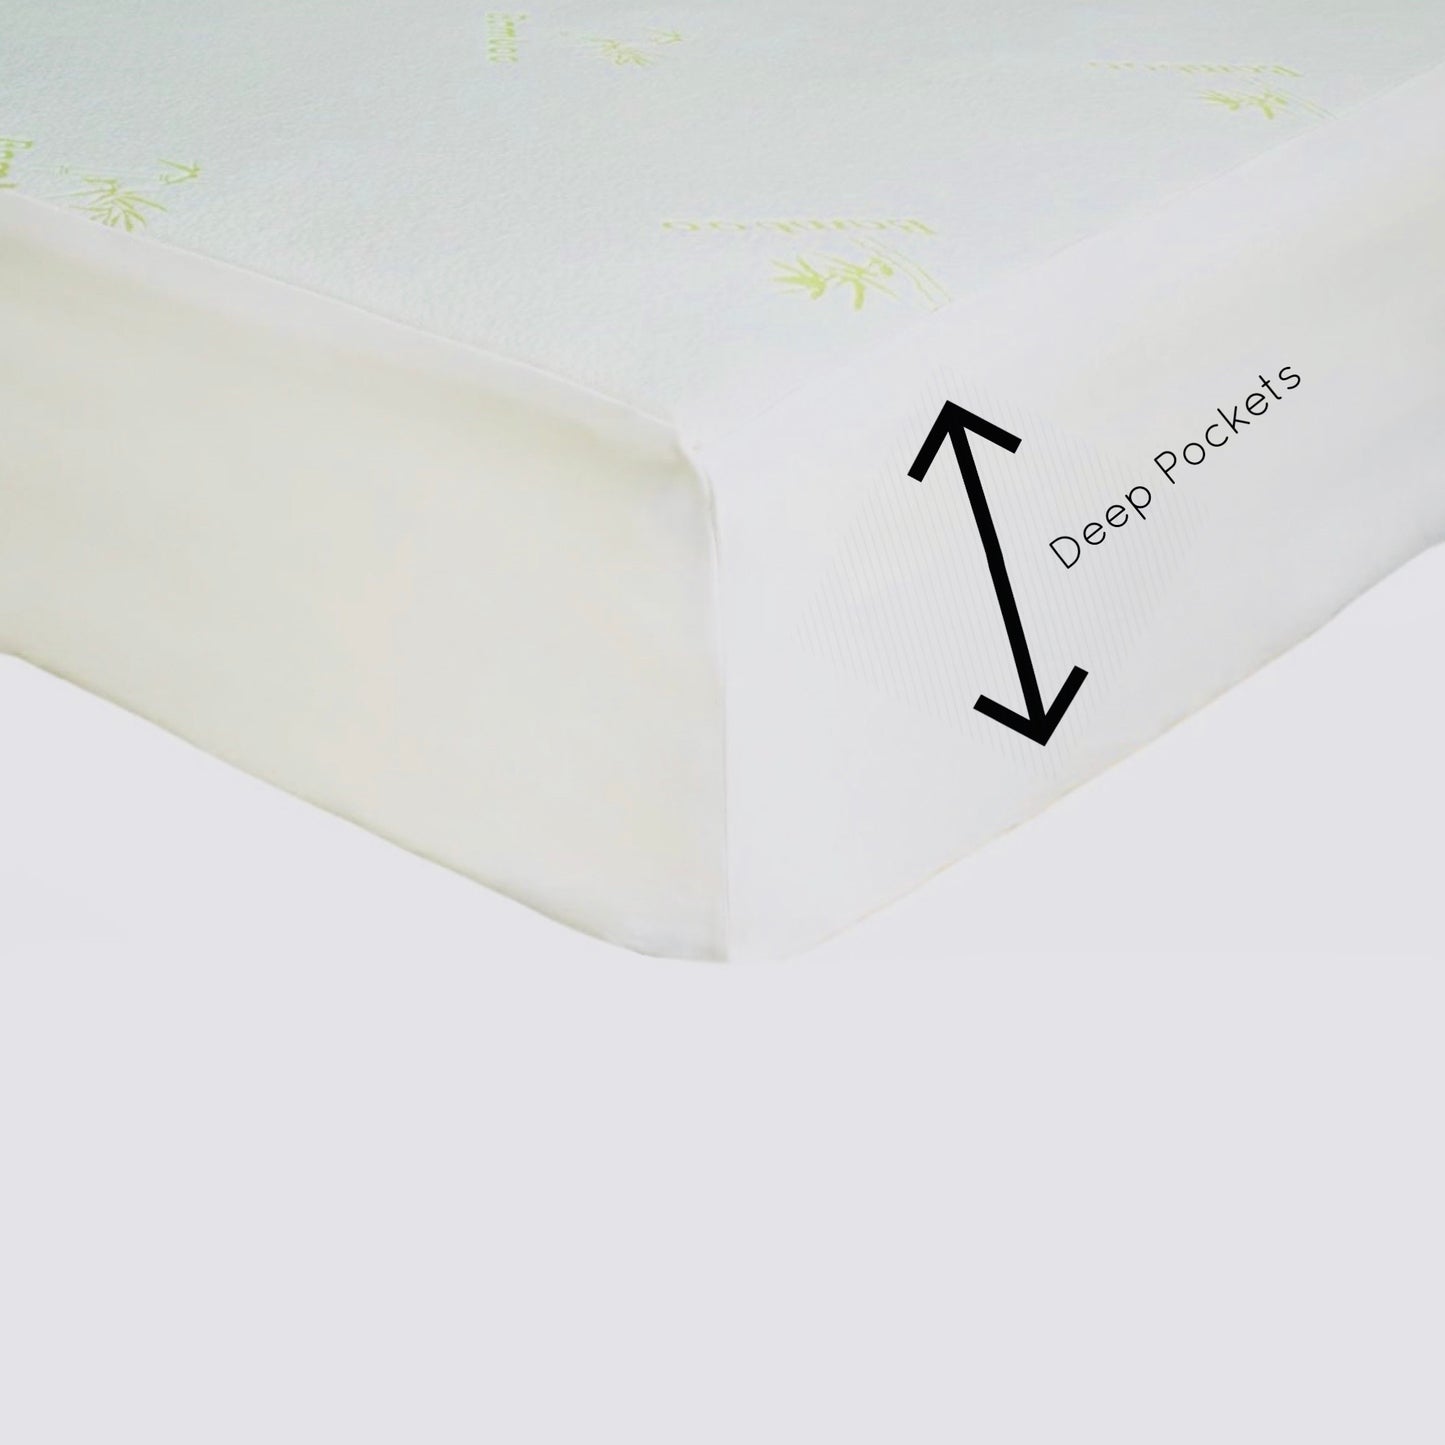 Aloe Vera Bamboo Essence Fitted Mattress Pad Protector with Deep Pockets